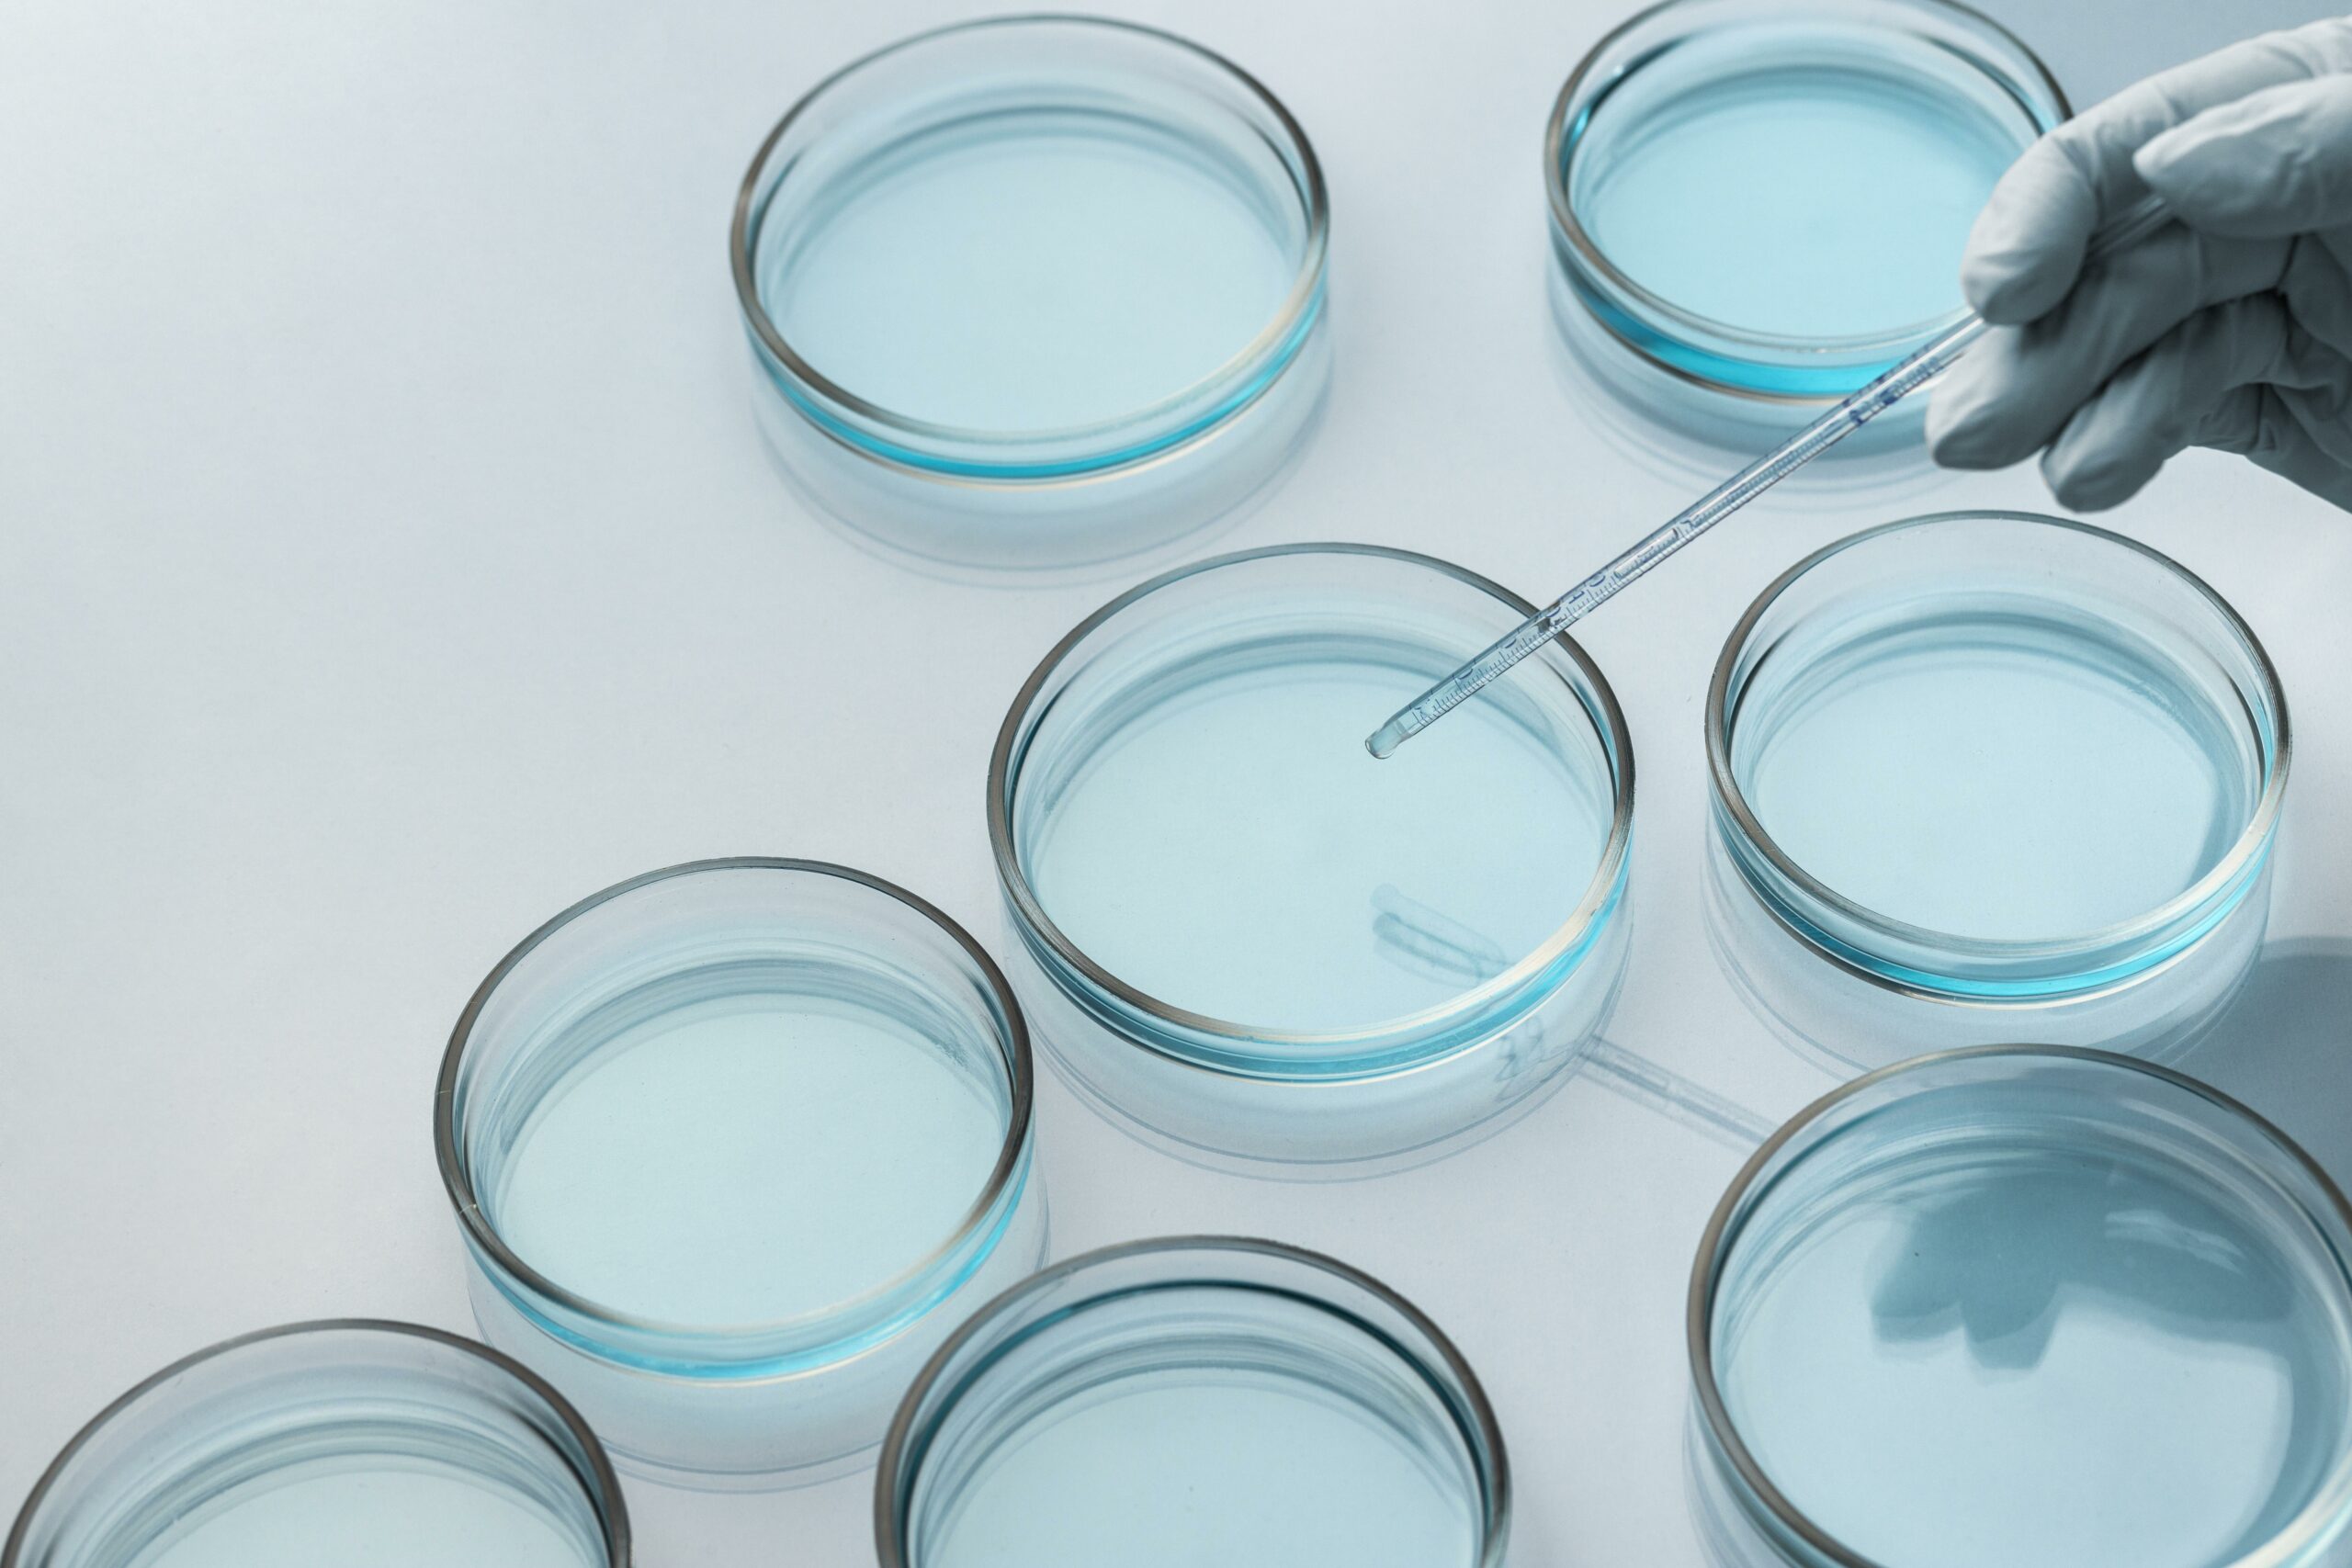 Petri dishes testing bacteria and cell immunity